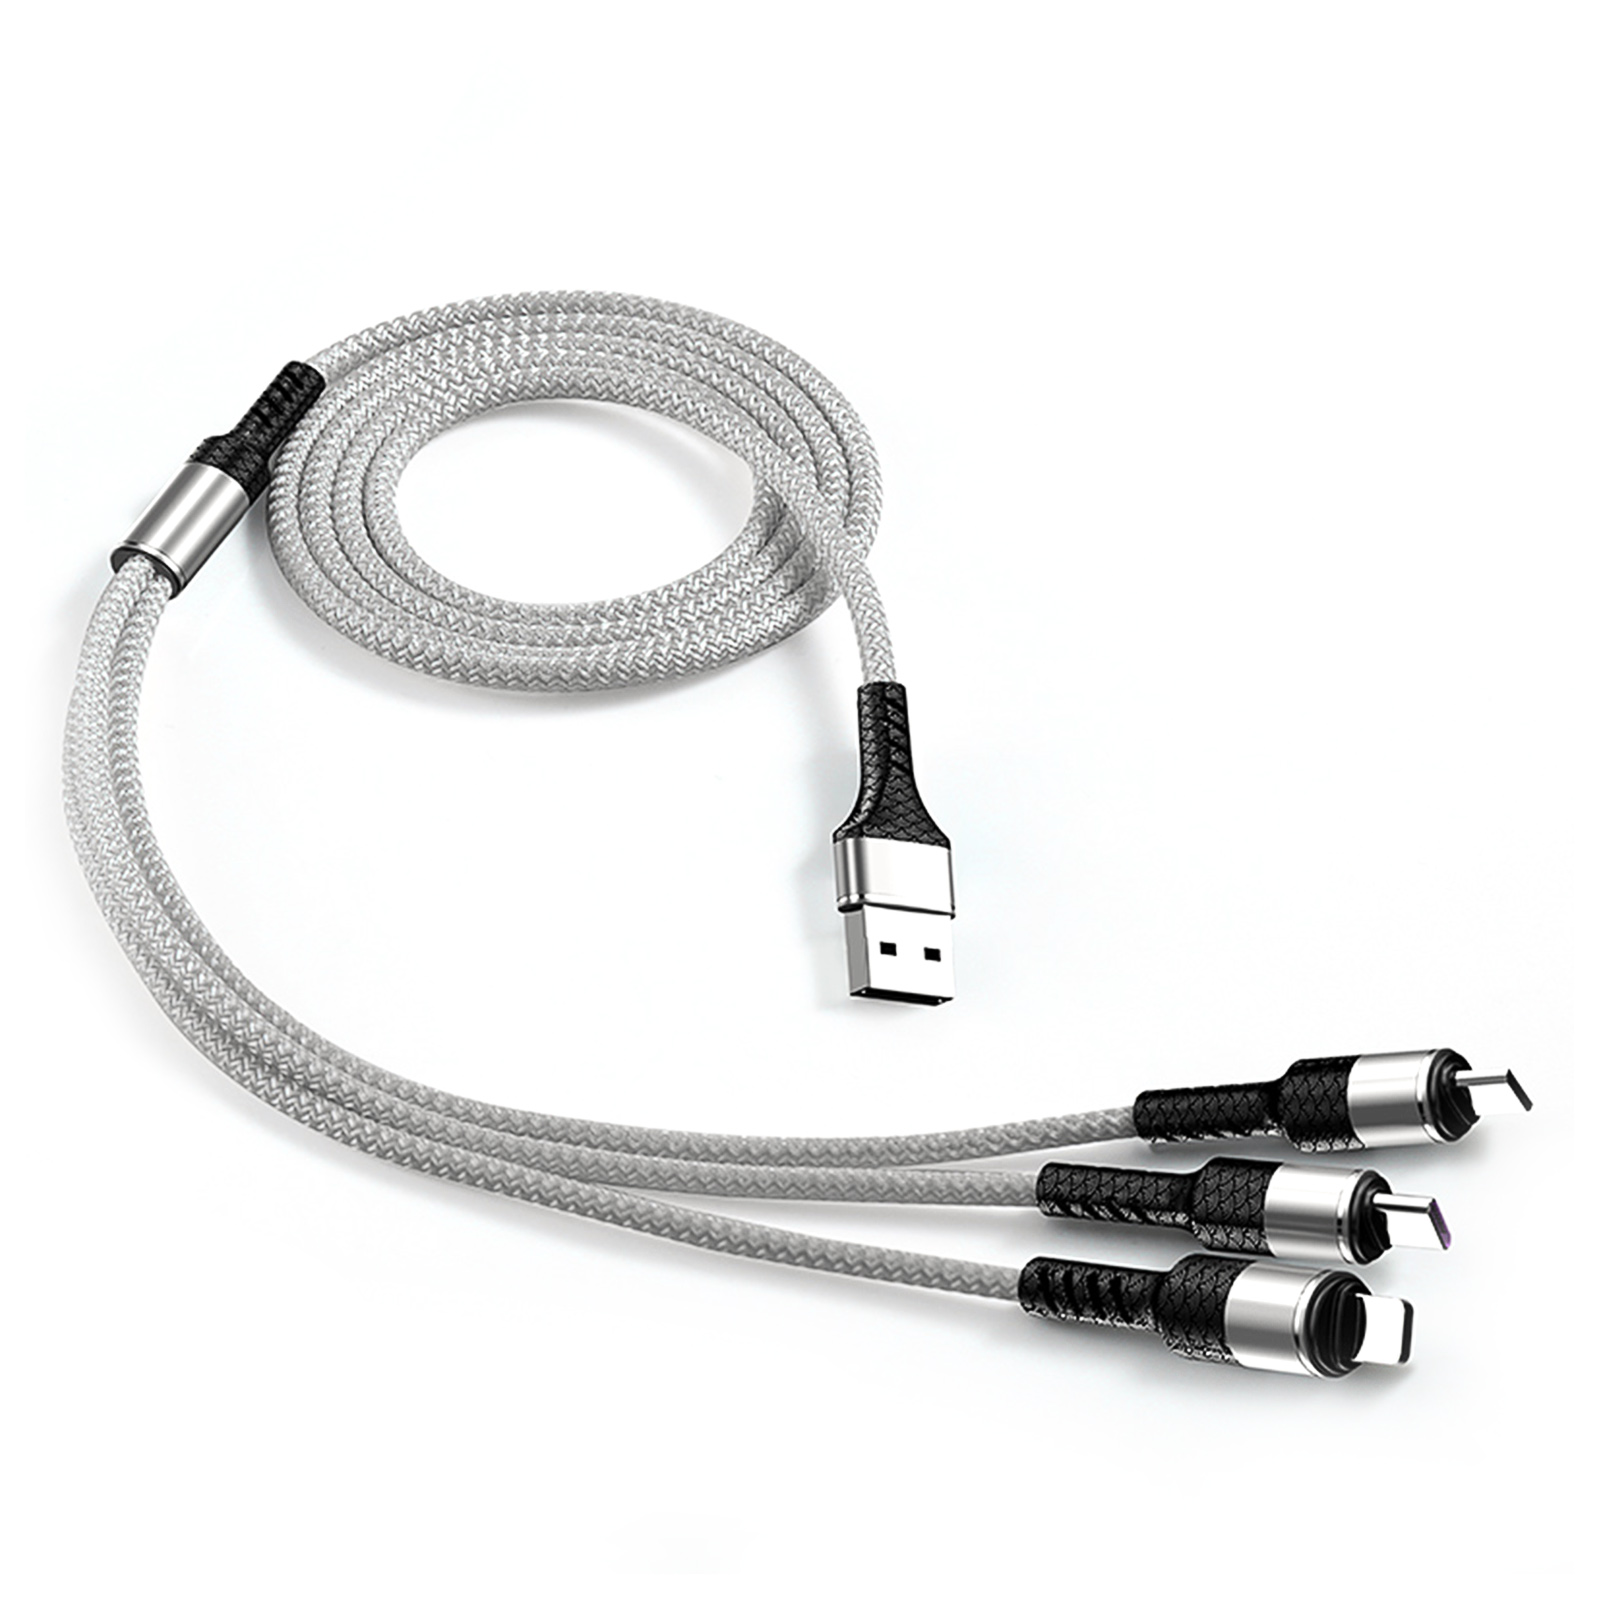 3-in-1 Nylon Strong Charge and Sync USB Cable 2.4A [3 FT] (Silver)